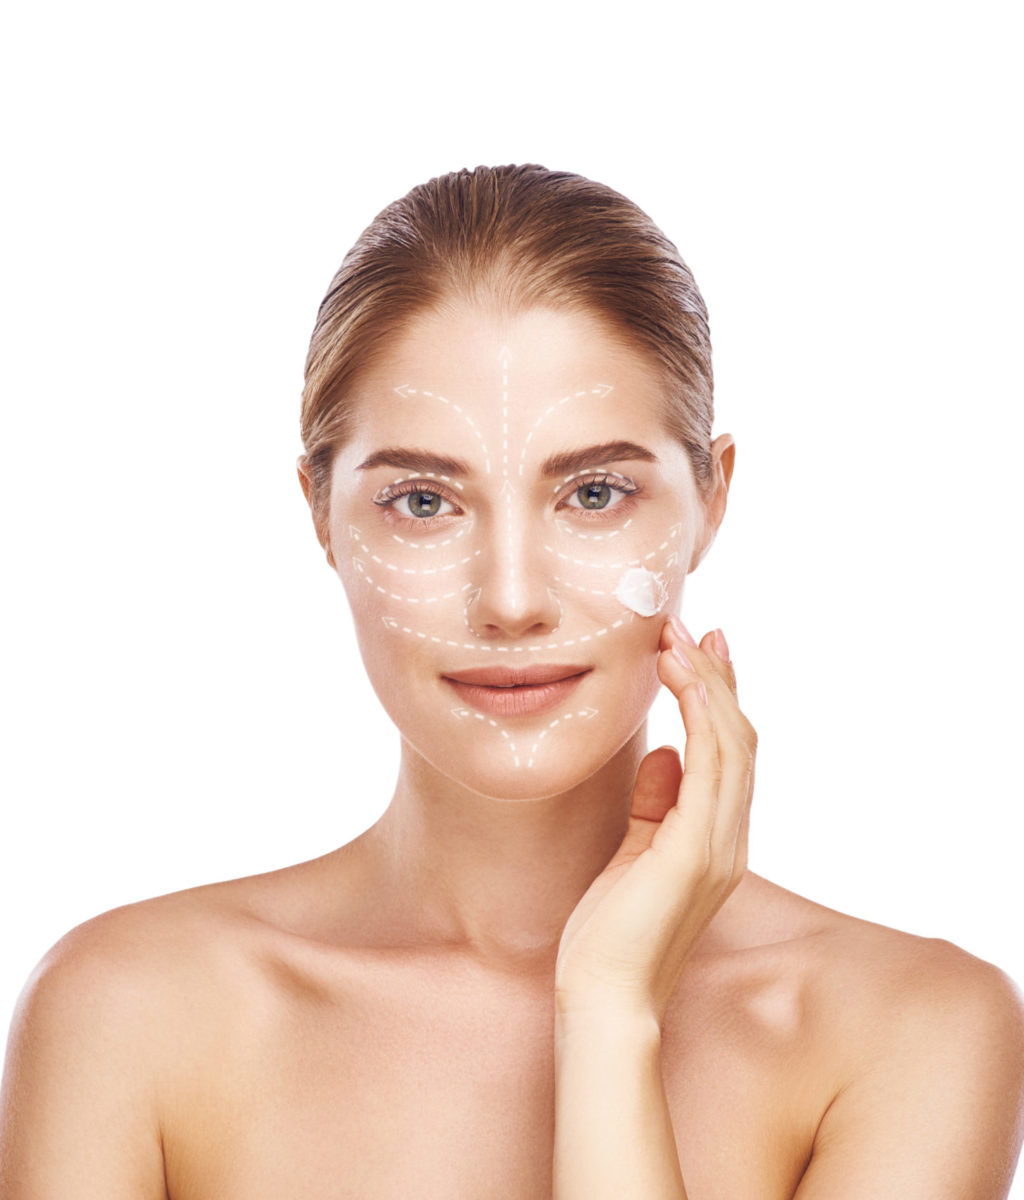 The importance of skin cream. Healthy and beautiful woman with graphic arrows over her face testing moisturizer cream while standing against white background. Skin care concept. Cosmetic products